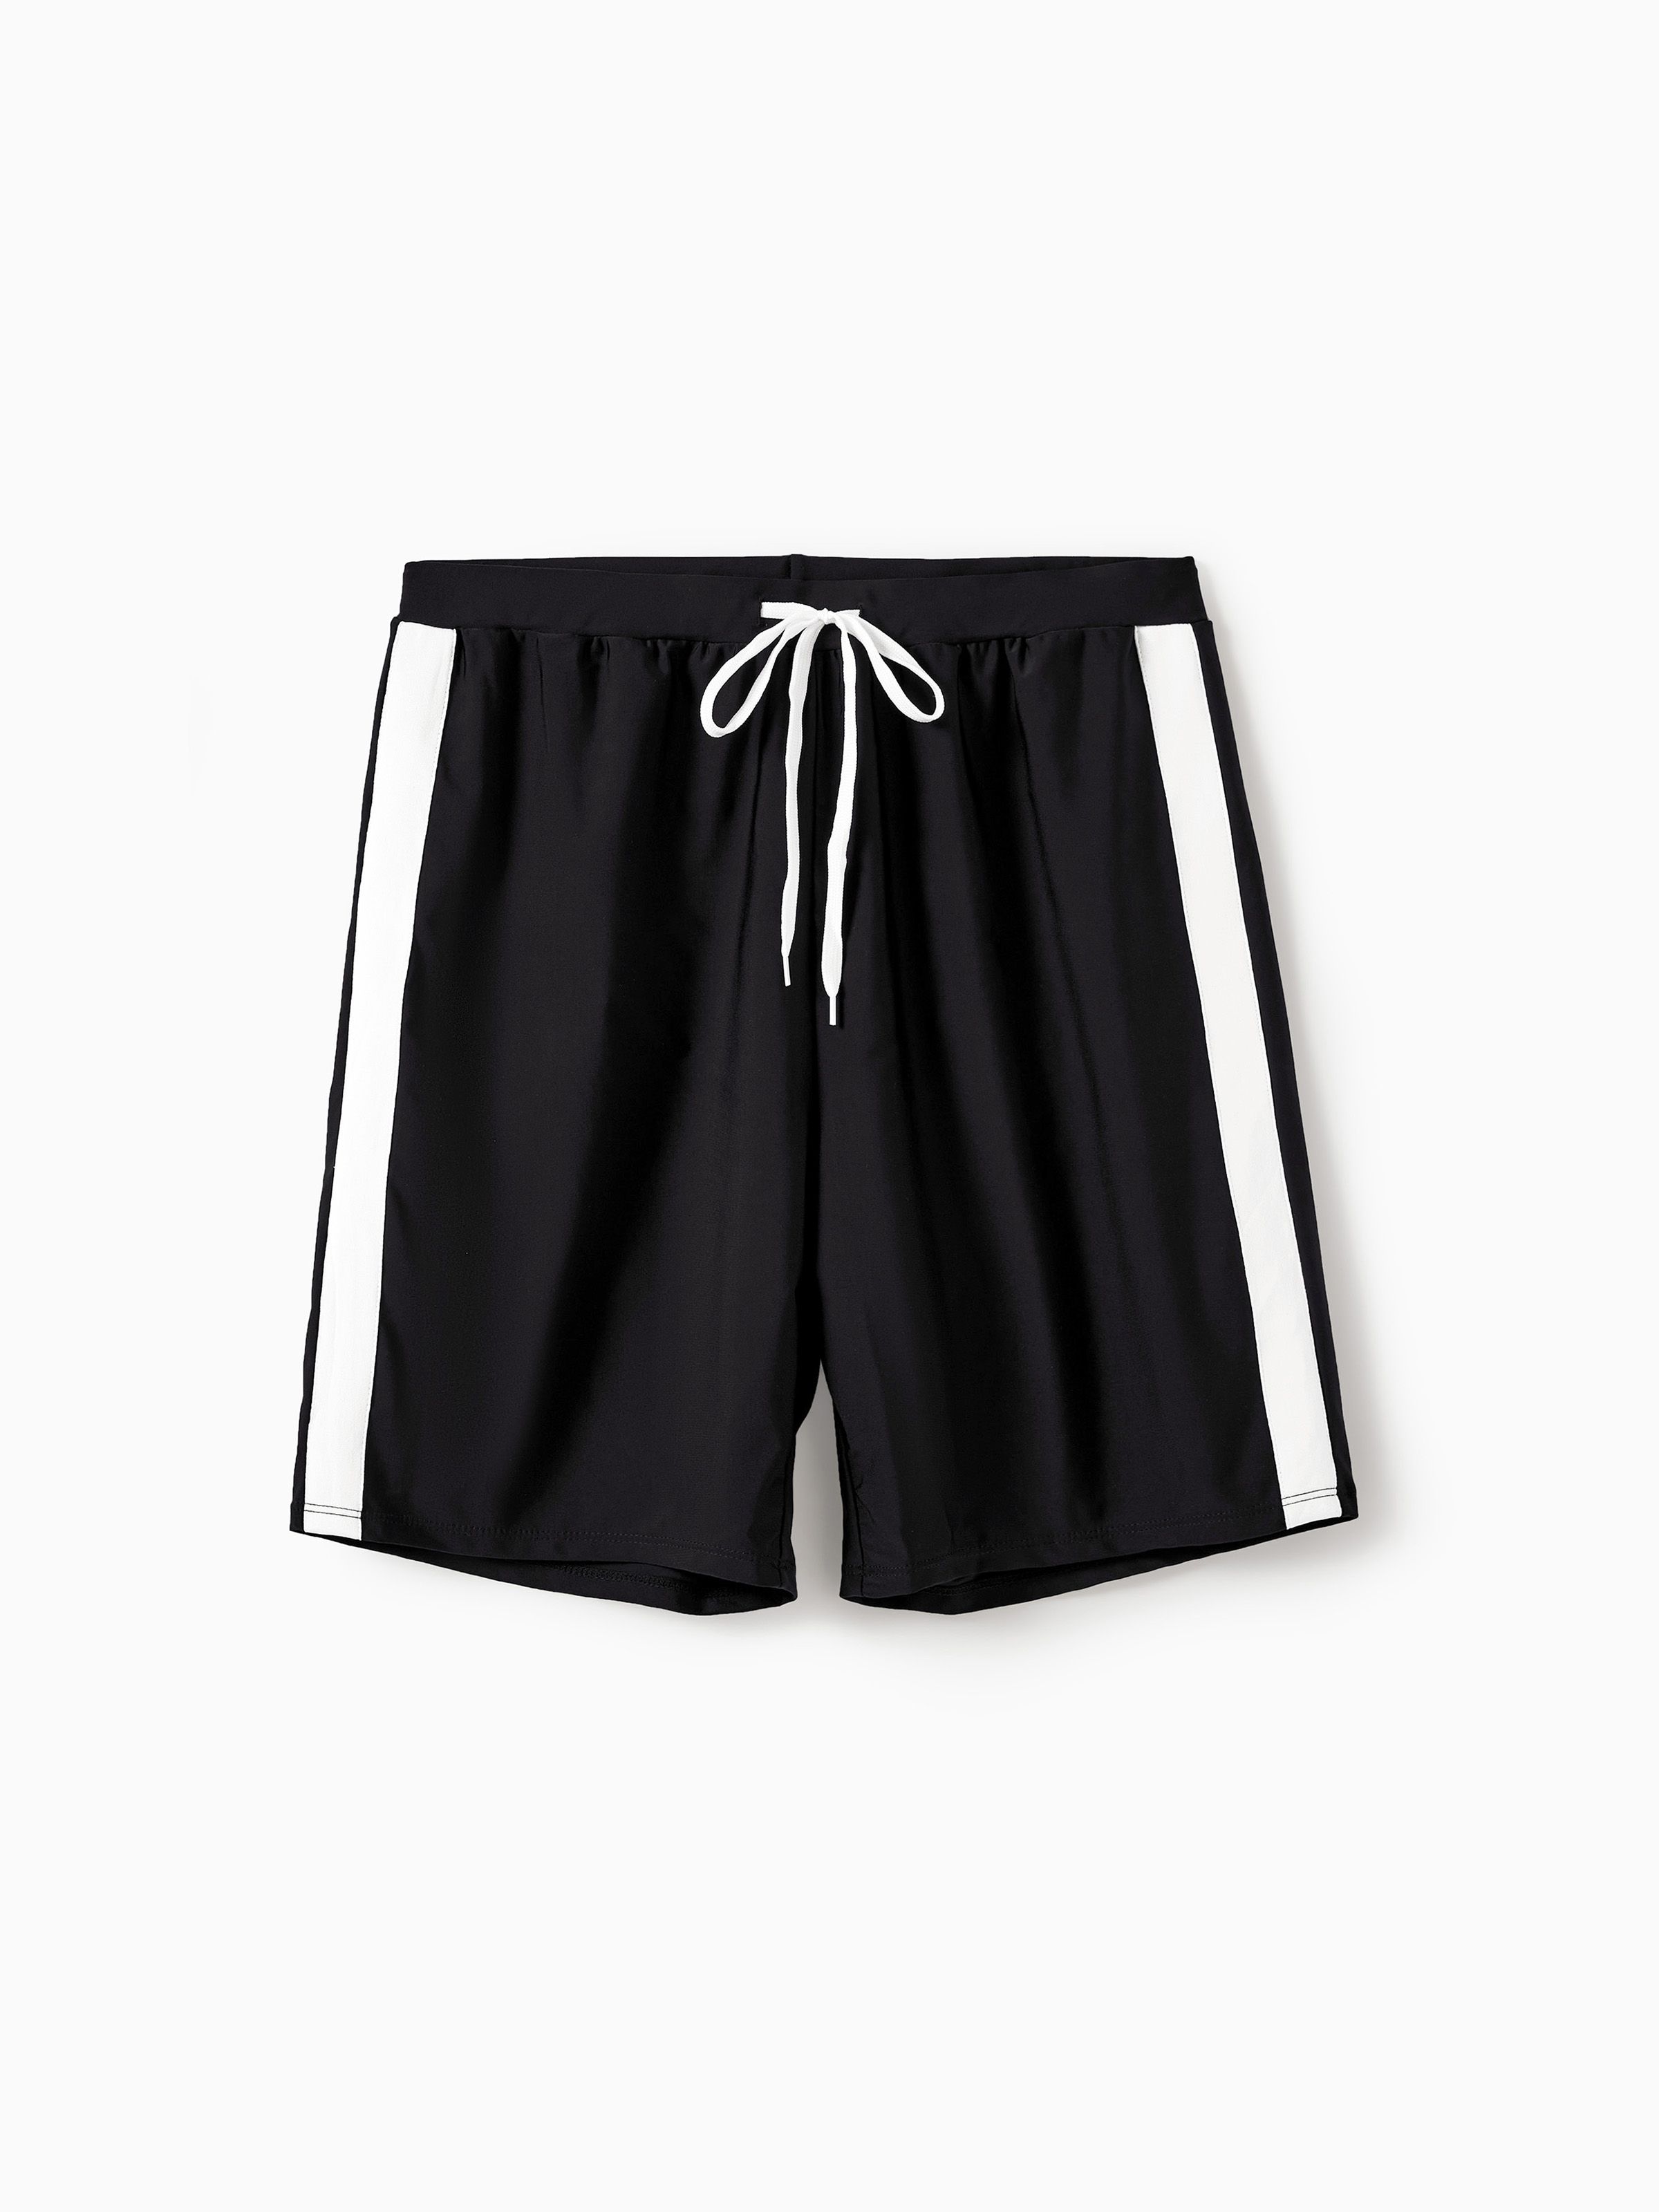 

Family Matching Black Drawstring Swim Trunks or Bow knot One-Piece Strap Swimsuit